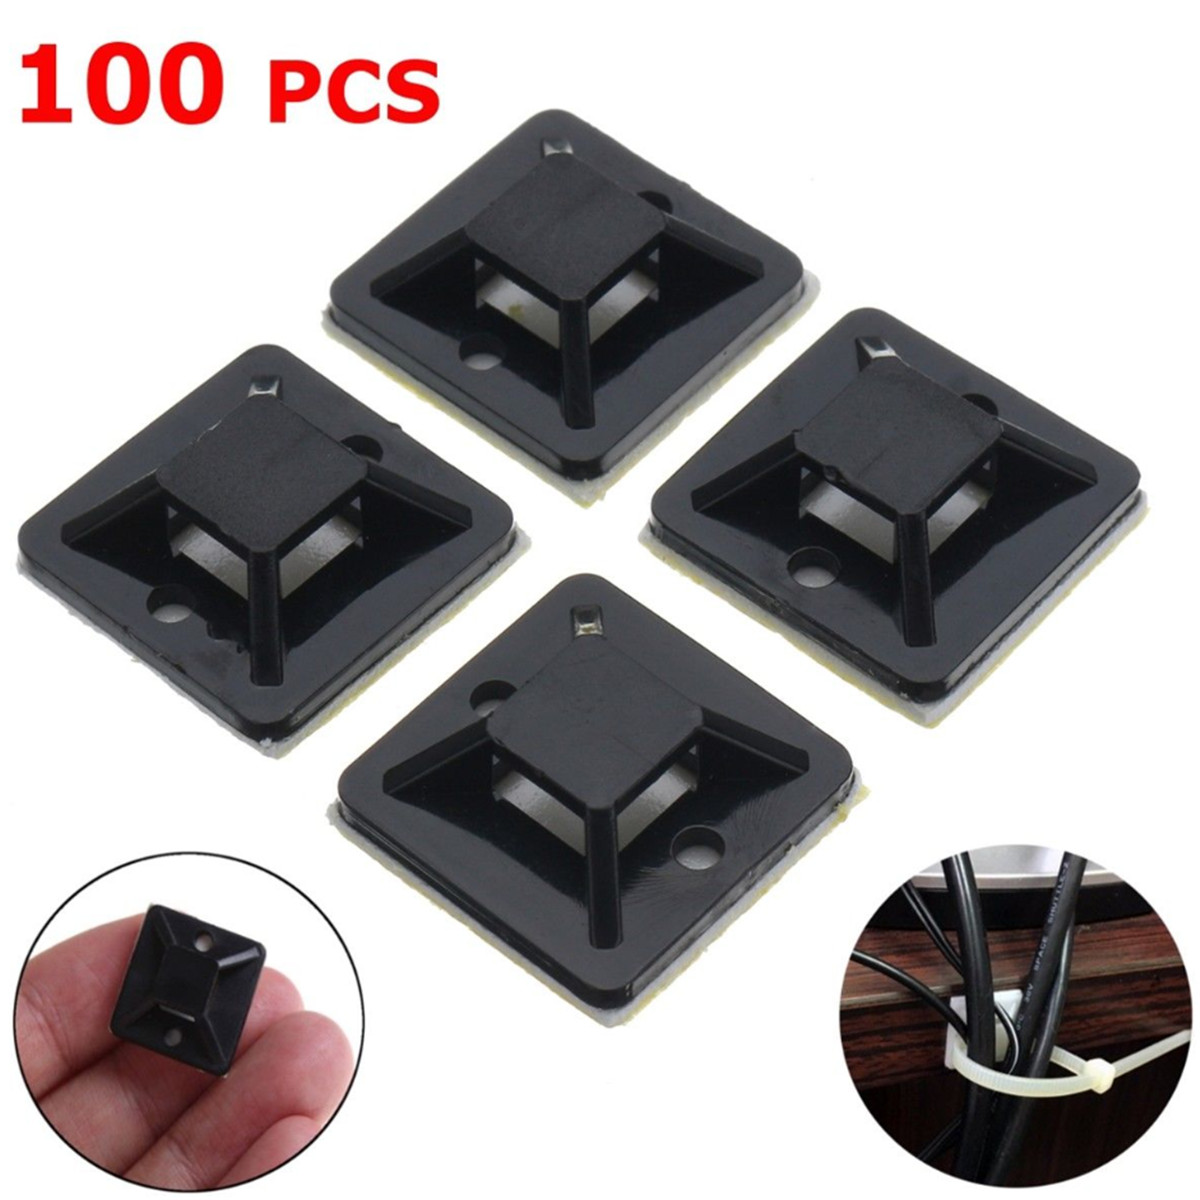 Chic 100pcs Zip Tie Car Cable Wire Removable Self Adhesive Wall Holder Mount